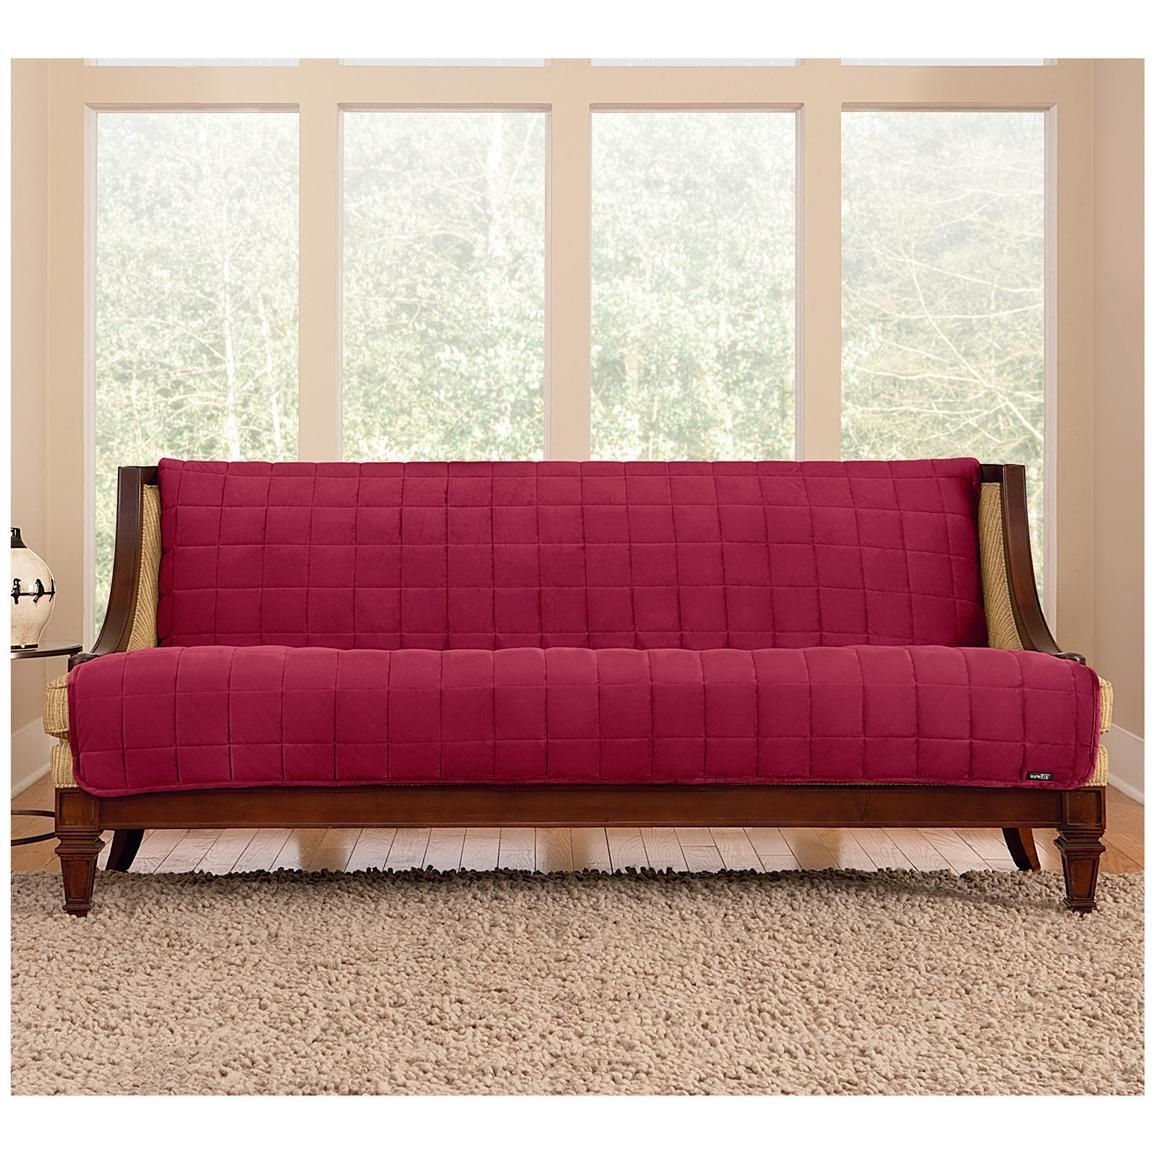 Sure Fit® Quilted Velvet Furniture Friend Armless Sofa Slipcover Regarding Armless Sofa Slipcovers (View 2 of 20)